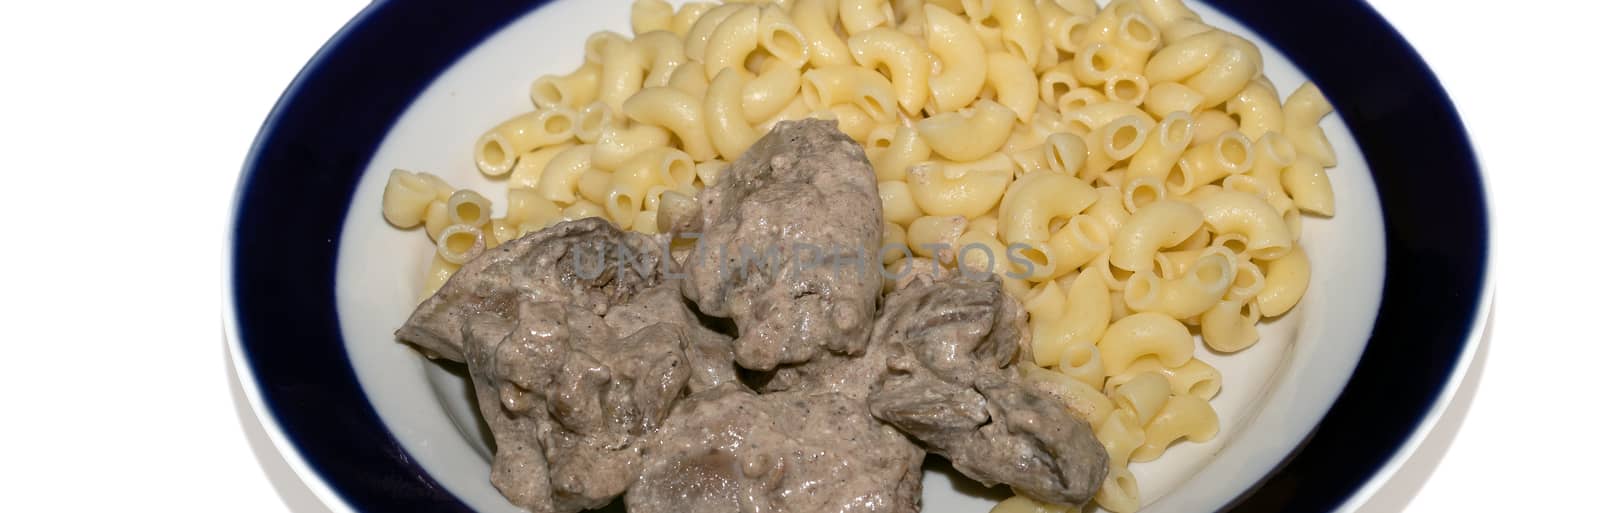 Chicken liver stewed in sour cream and a side dish of pasta in a bowl on a white background, close-up. healthy food, menu concept background